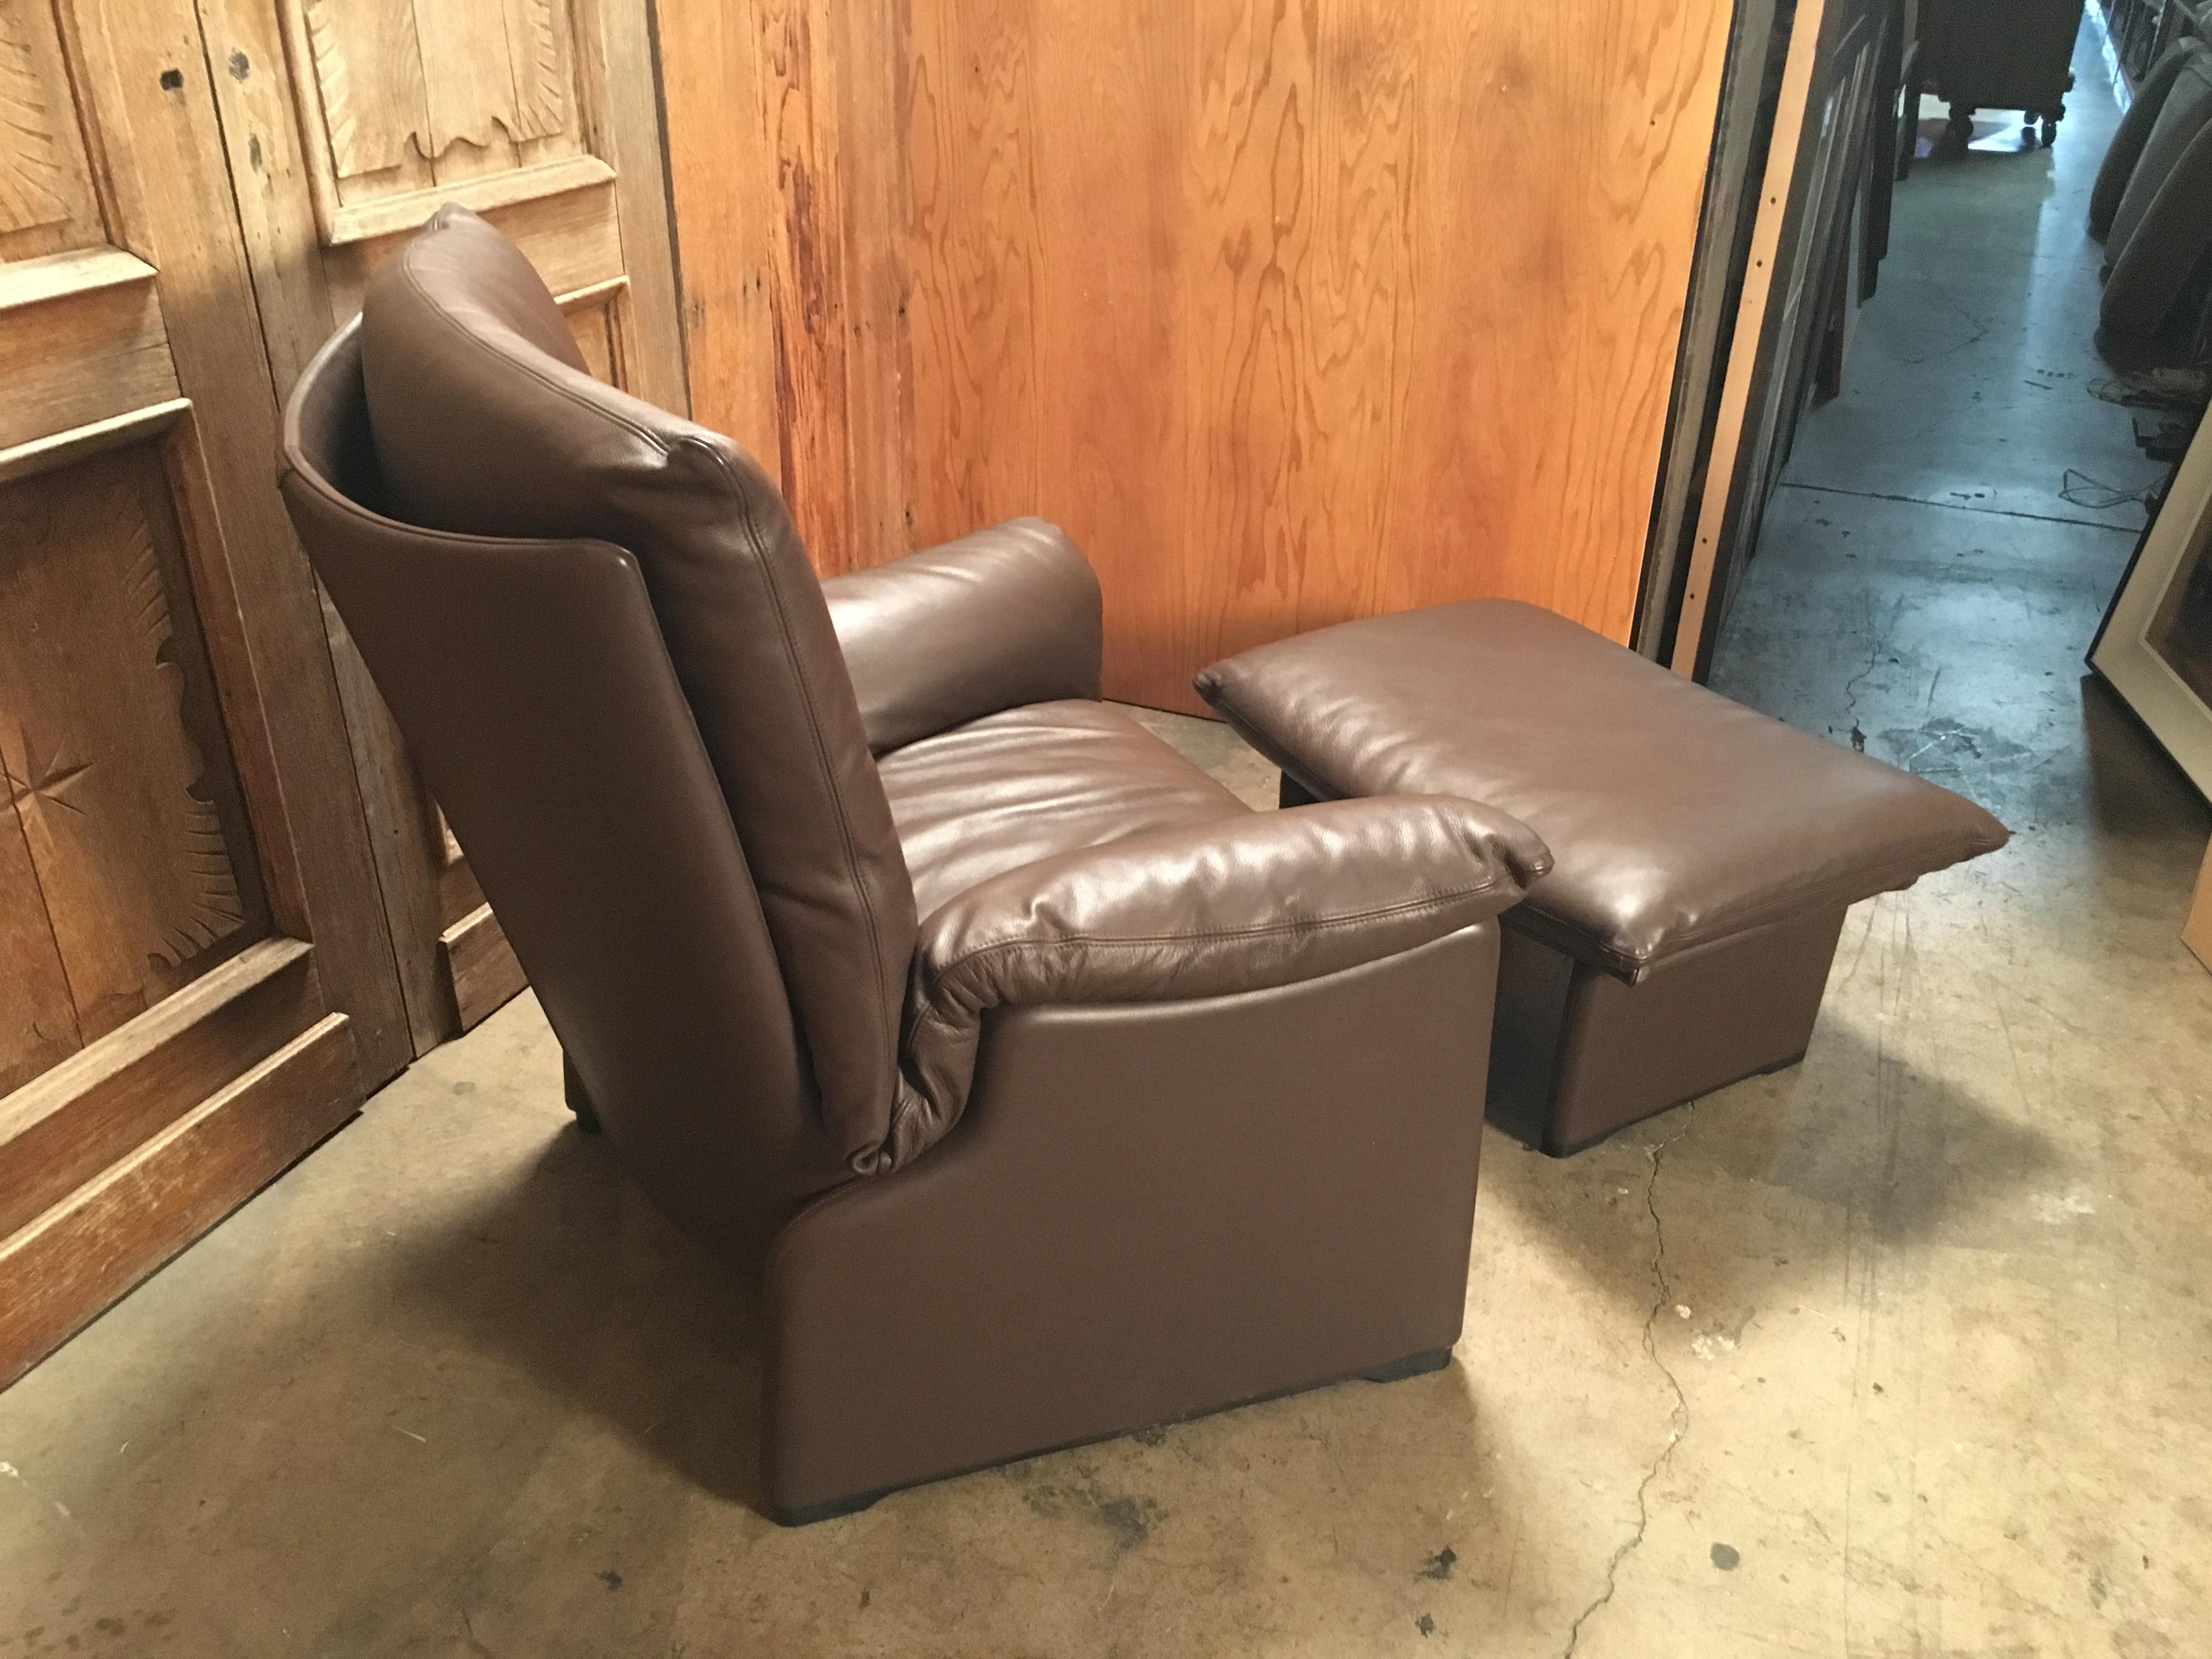 Thick chocolate brown leather lounge chair and ottoman designed by Vico Magistretti
Chair measures 36.5